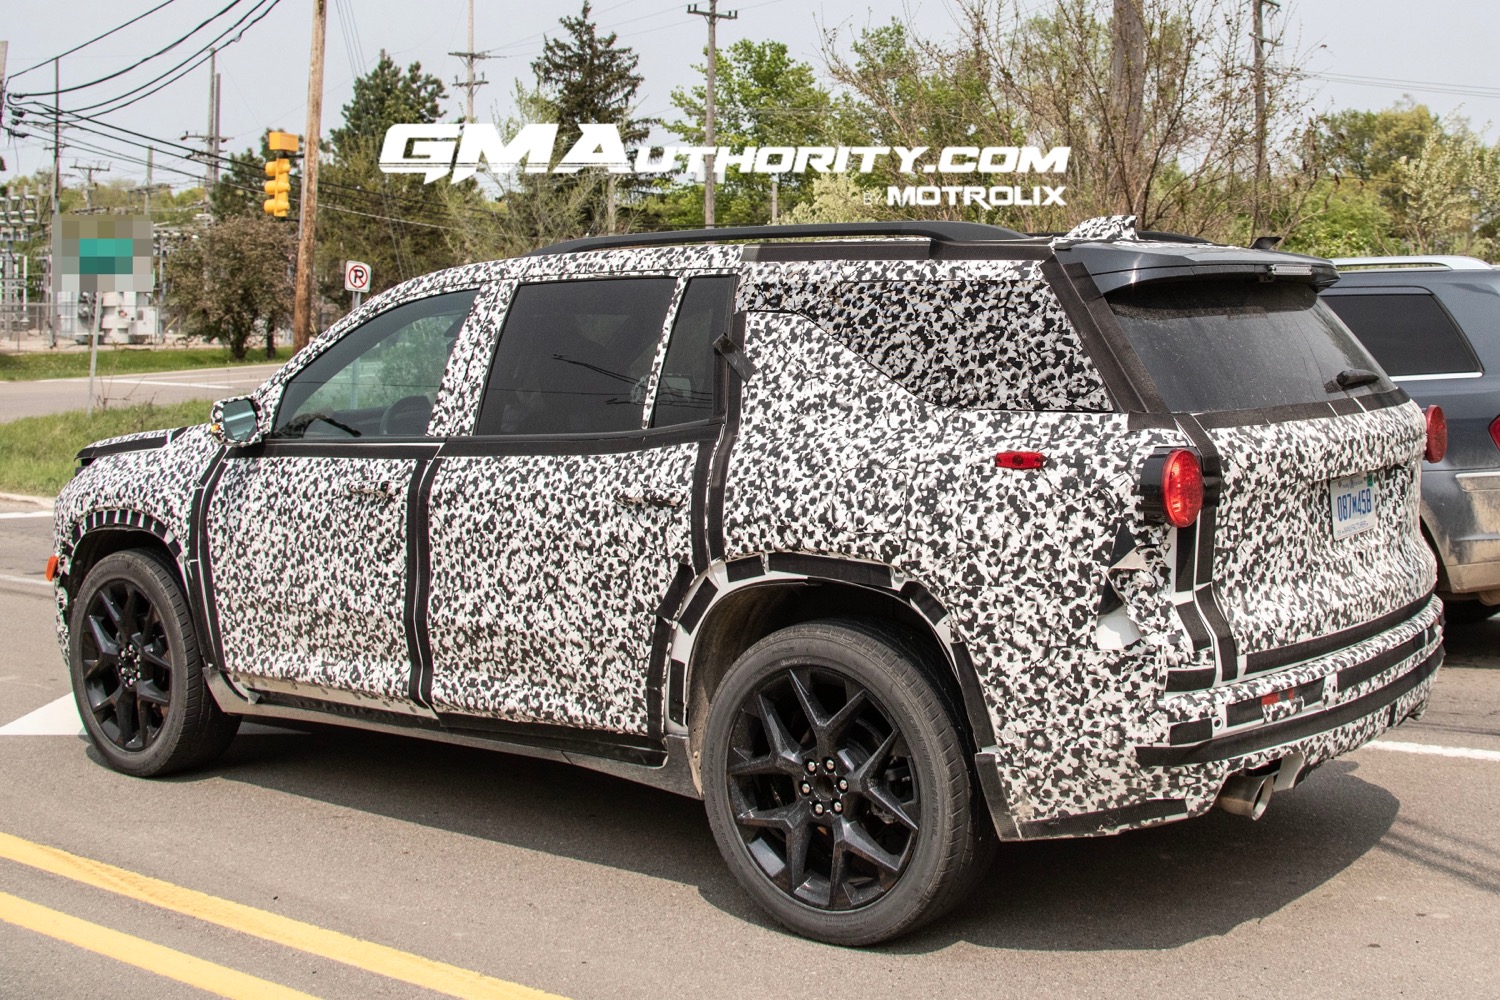 2024 Chevy Traverse Are These The Wheels GM's Been Hiding?